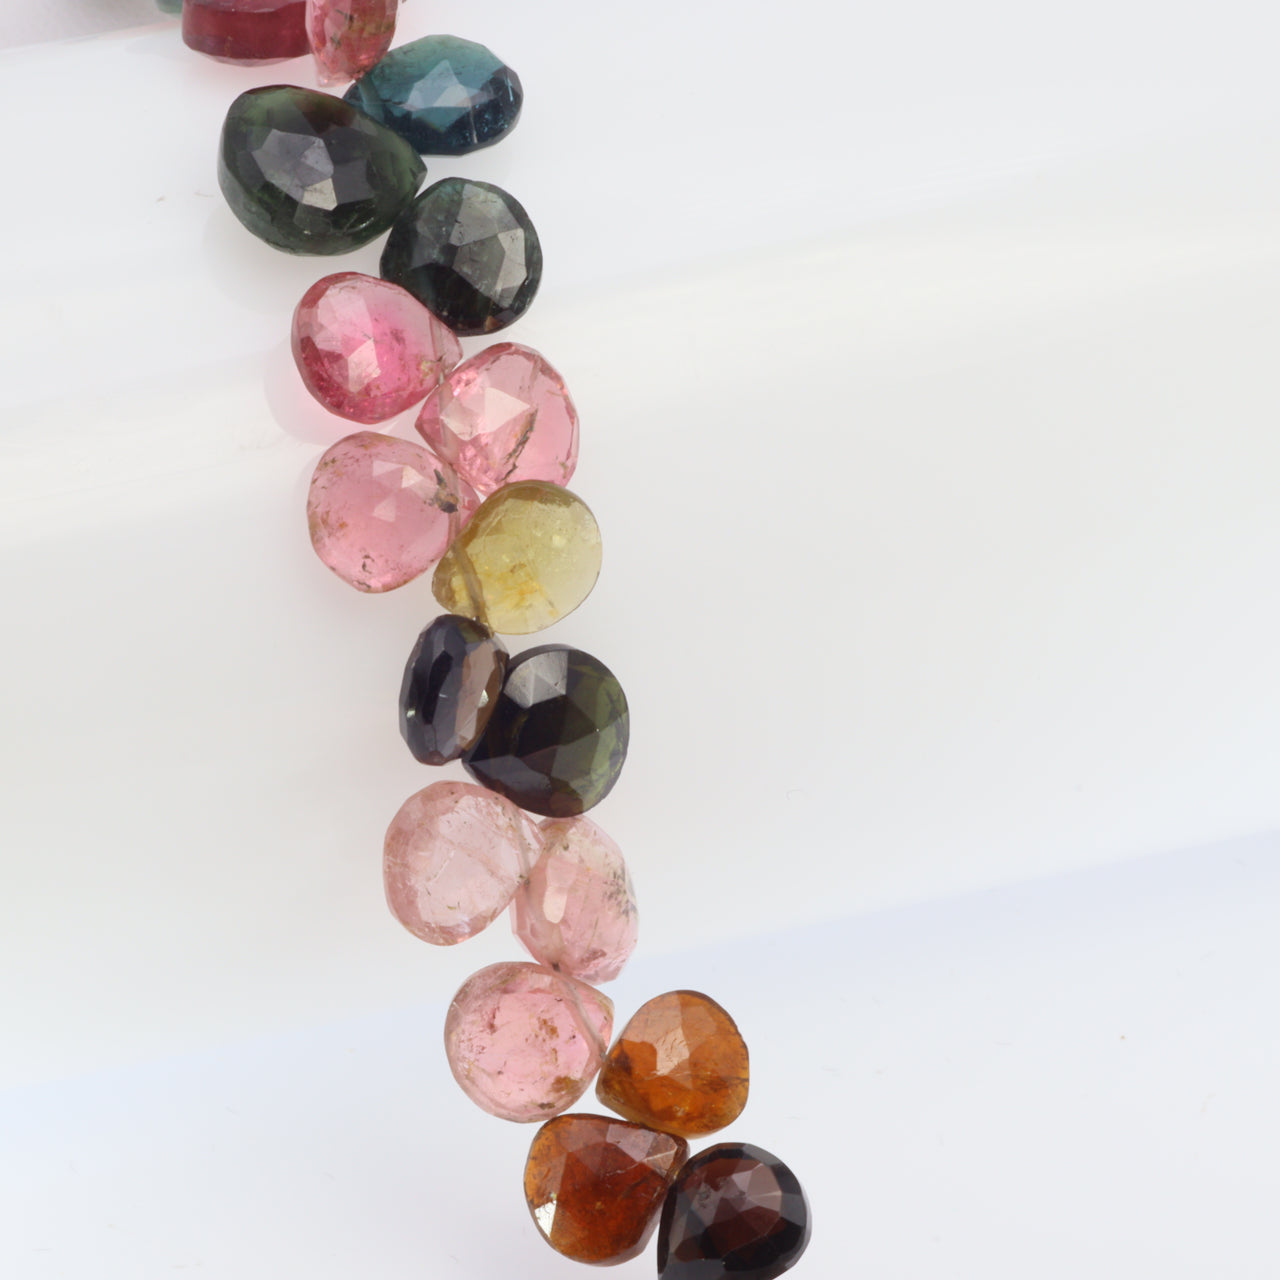 Watermelon Tourmaline 8mm Faceted Heart Shaped Briolettes